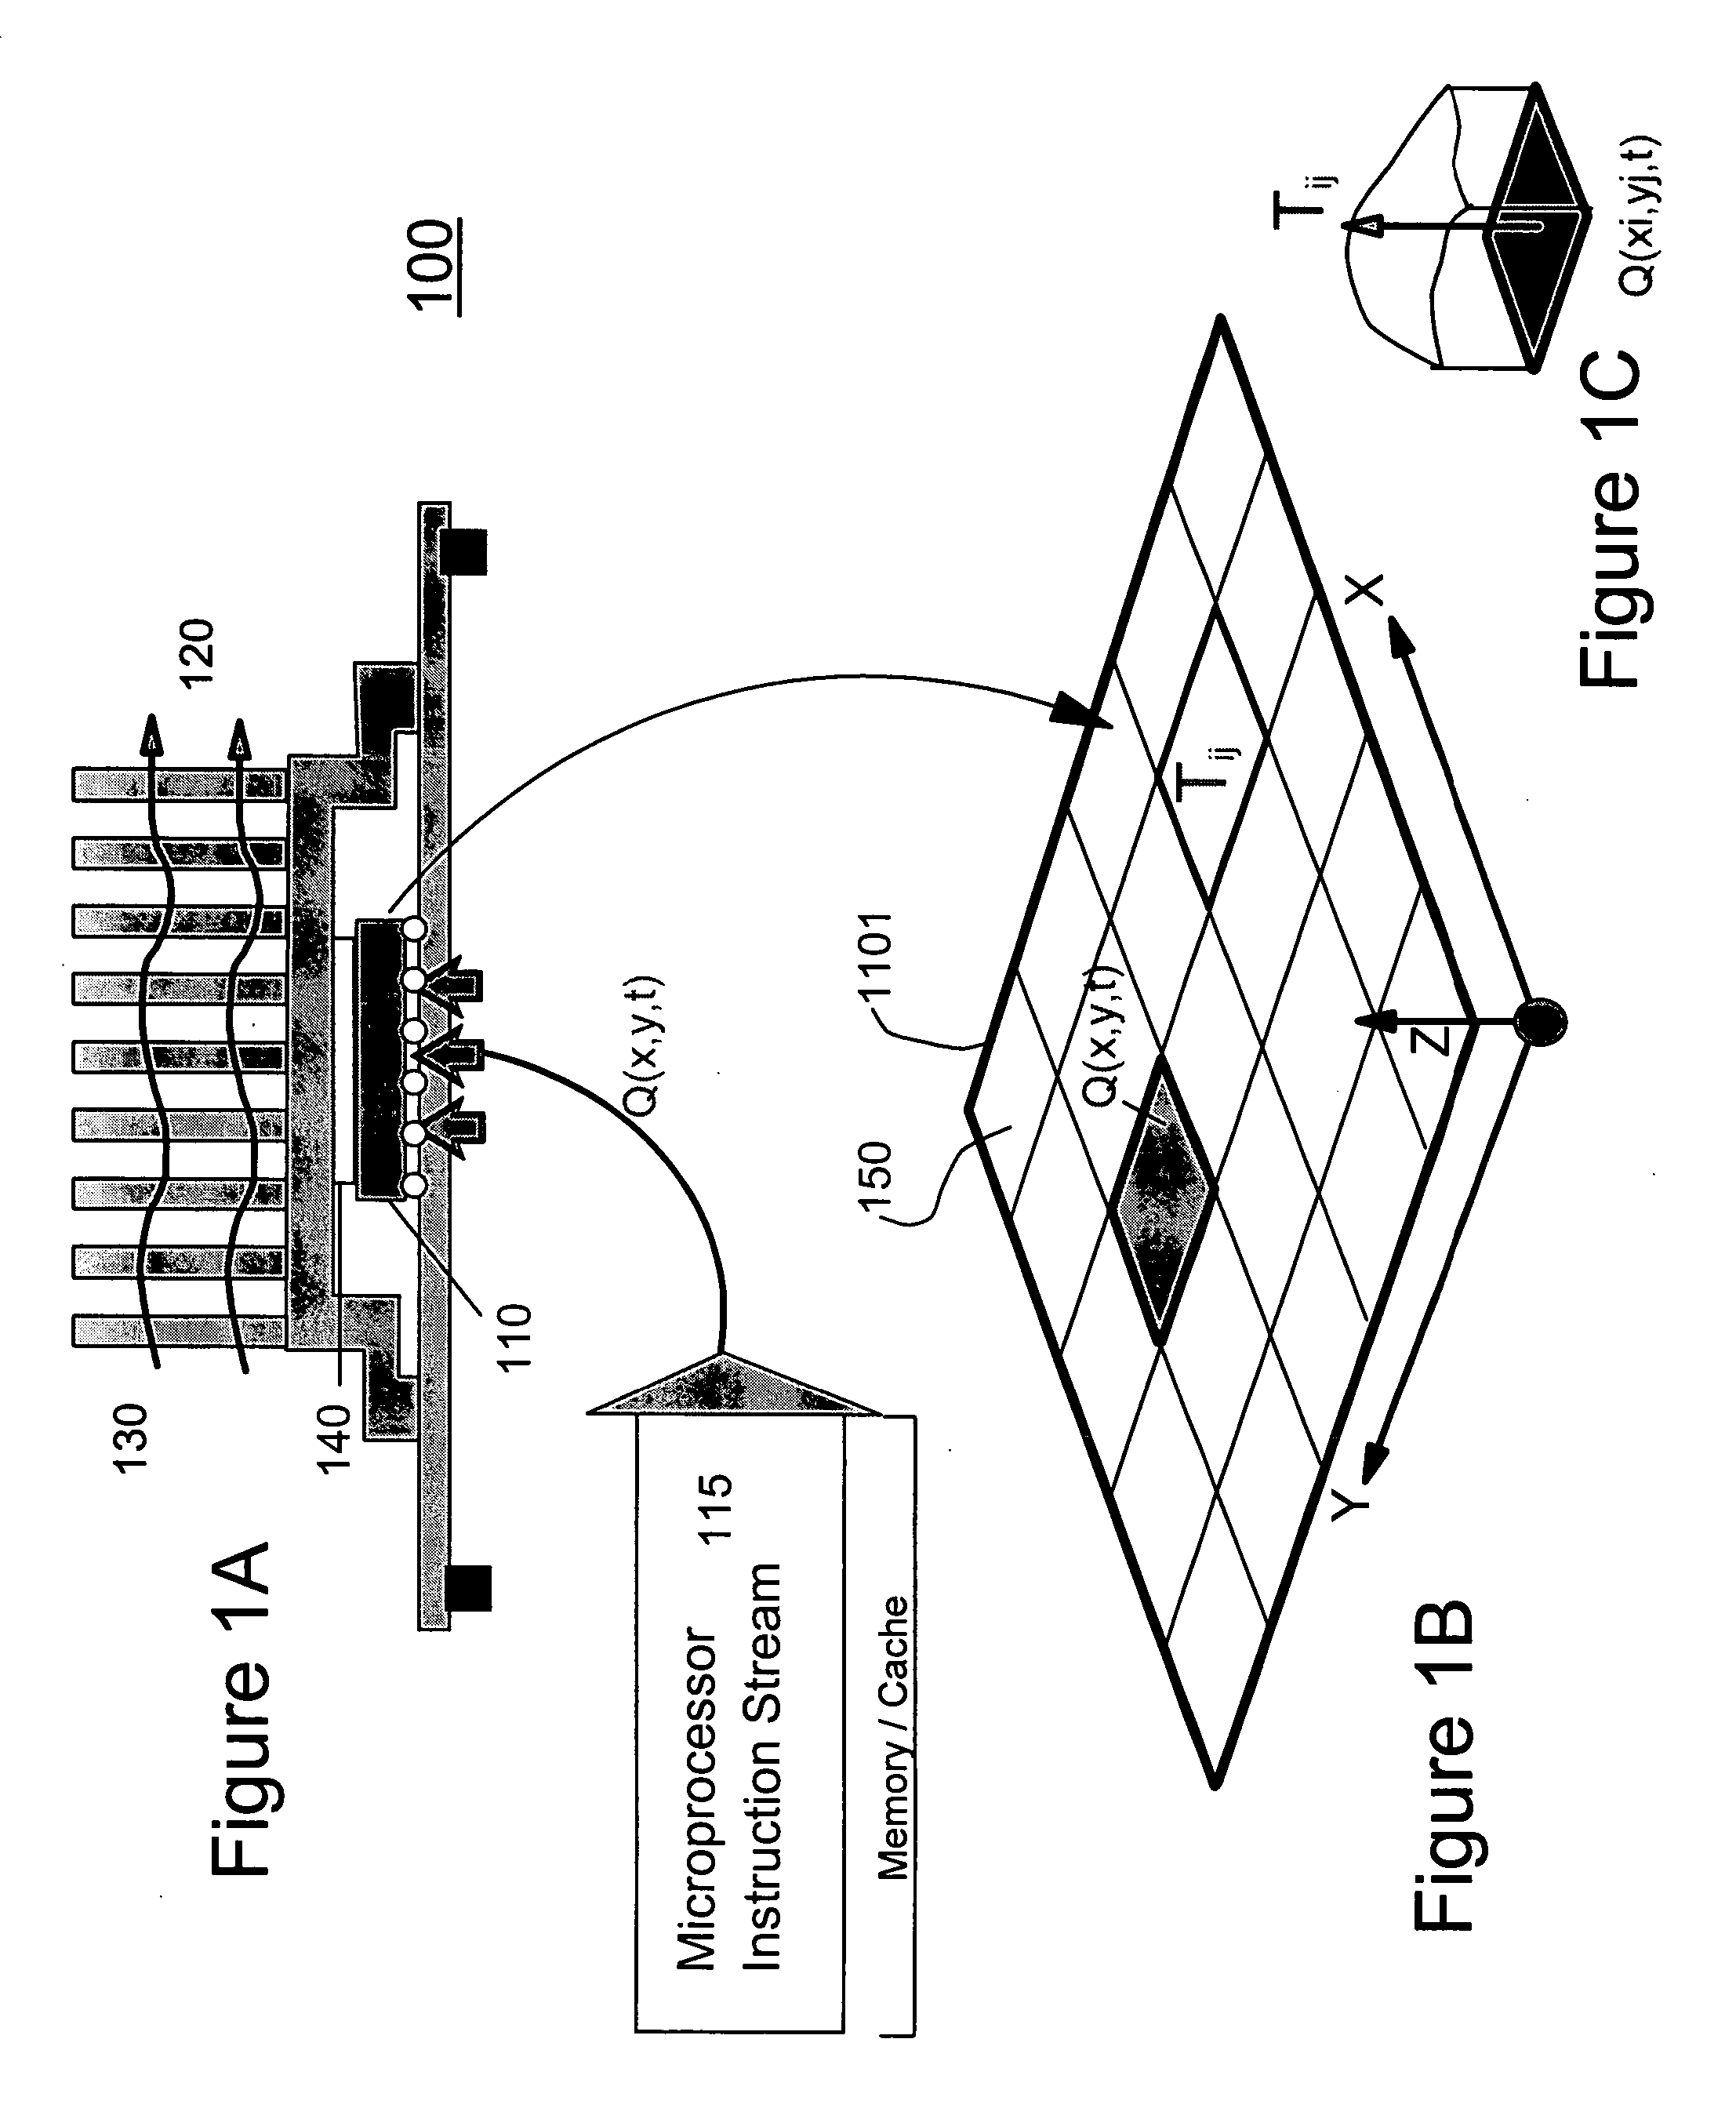 Method and system for real-time estimation and prediction of the thermal state of a microprocessor unit